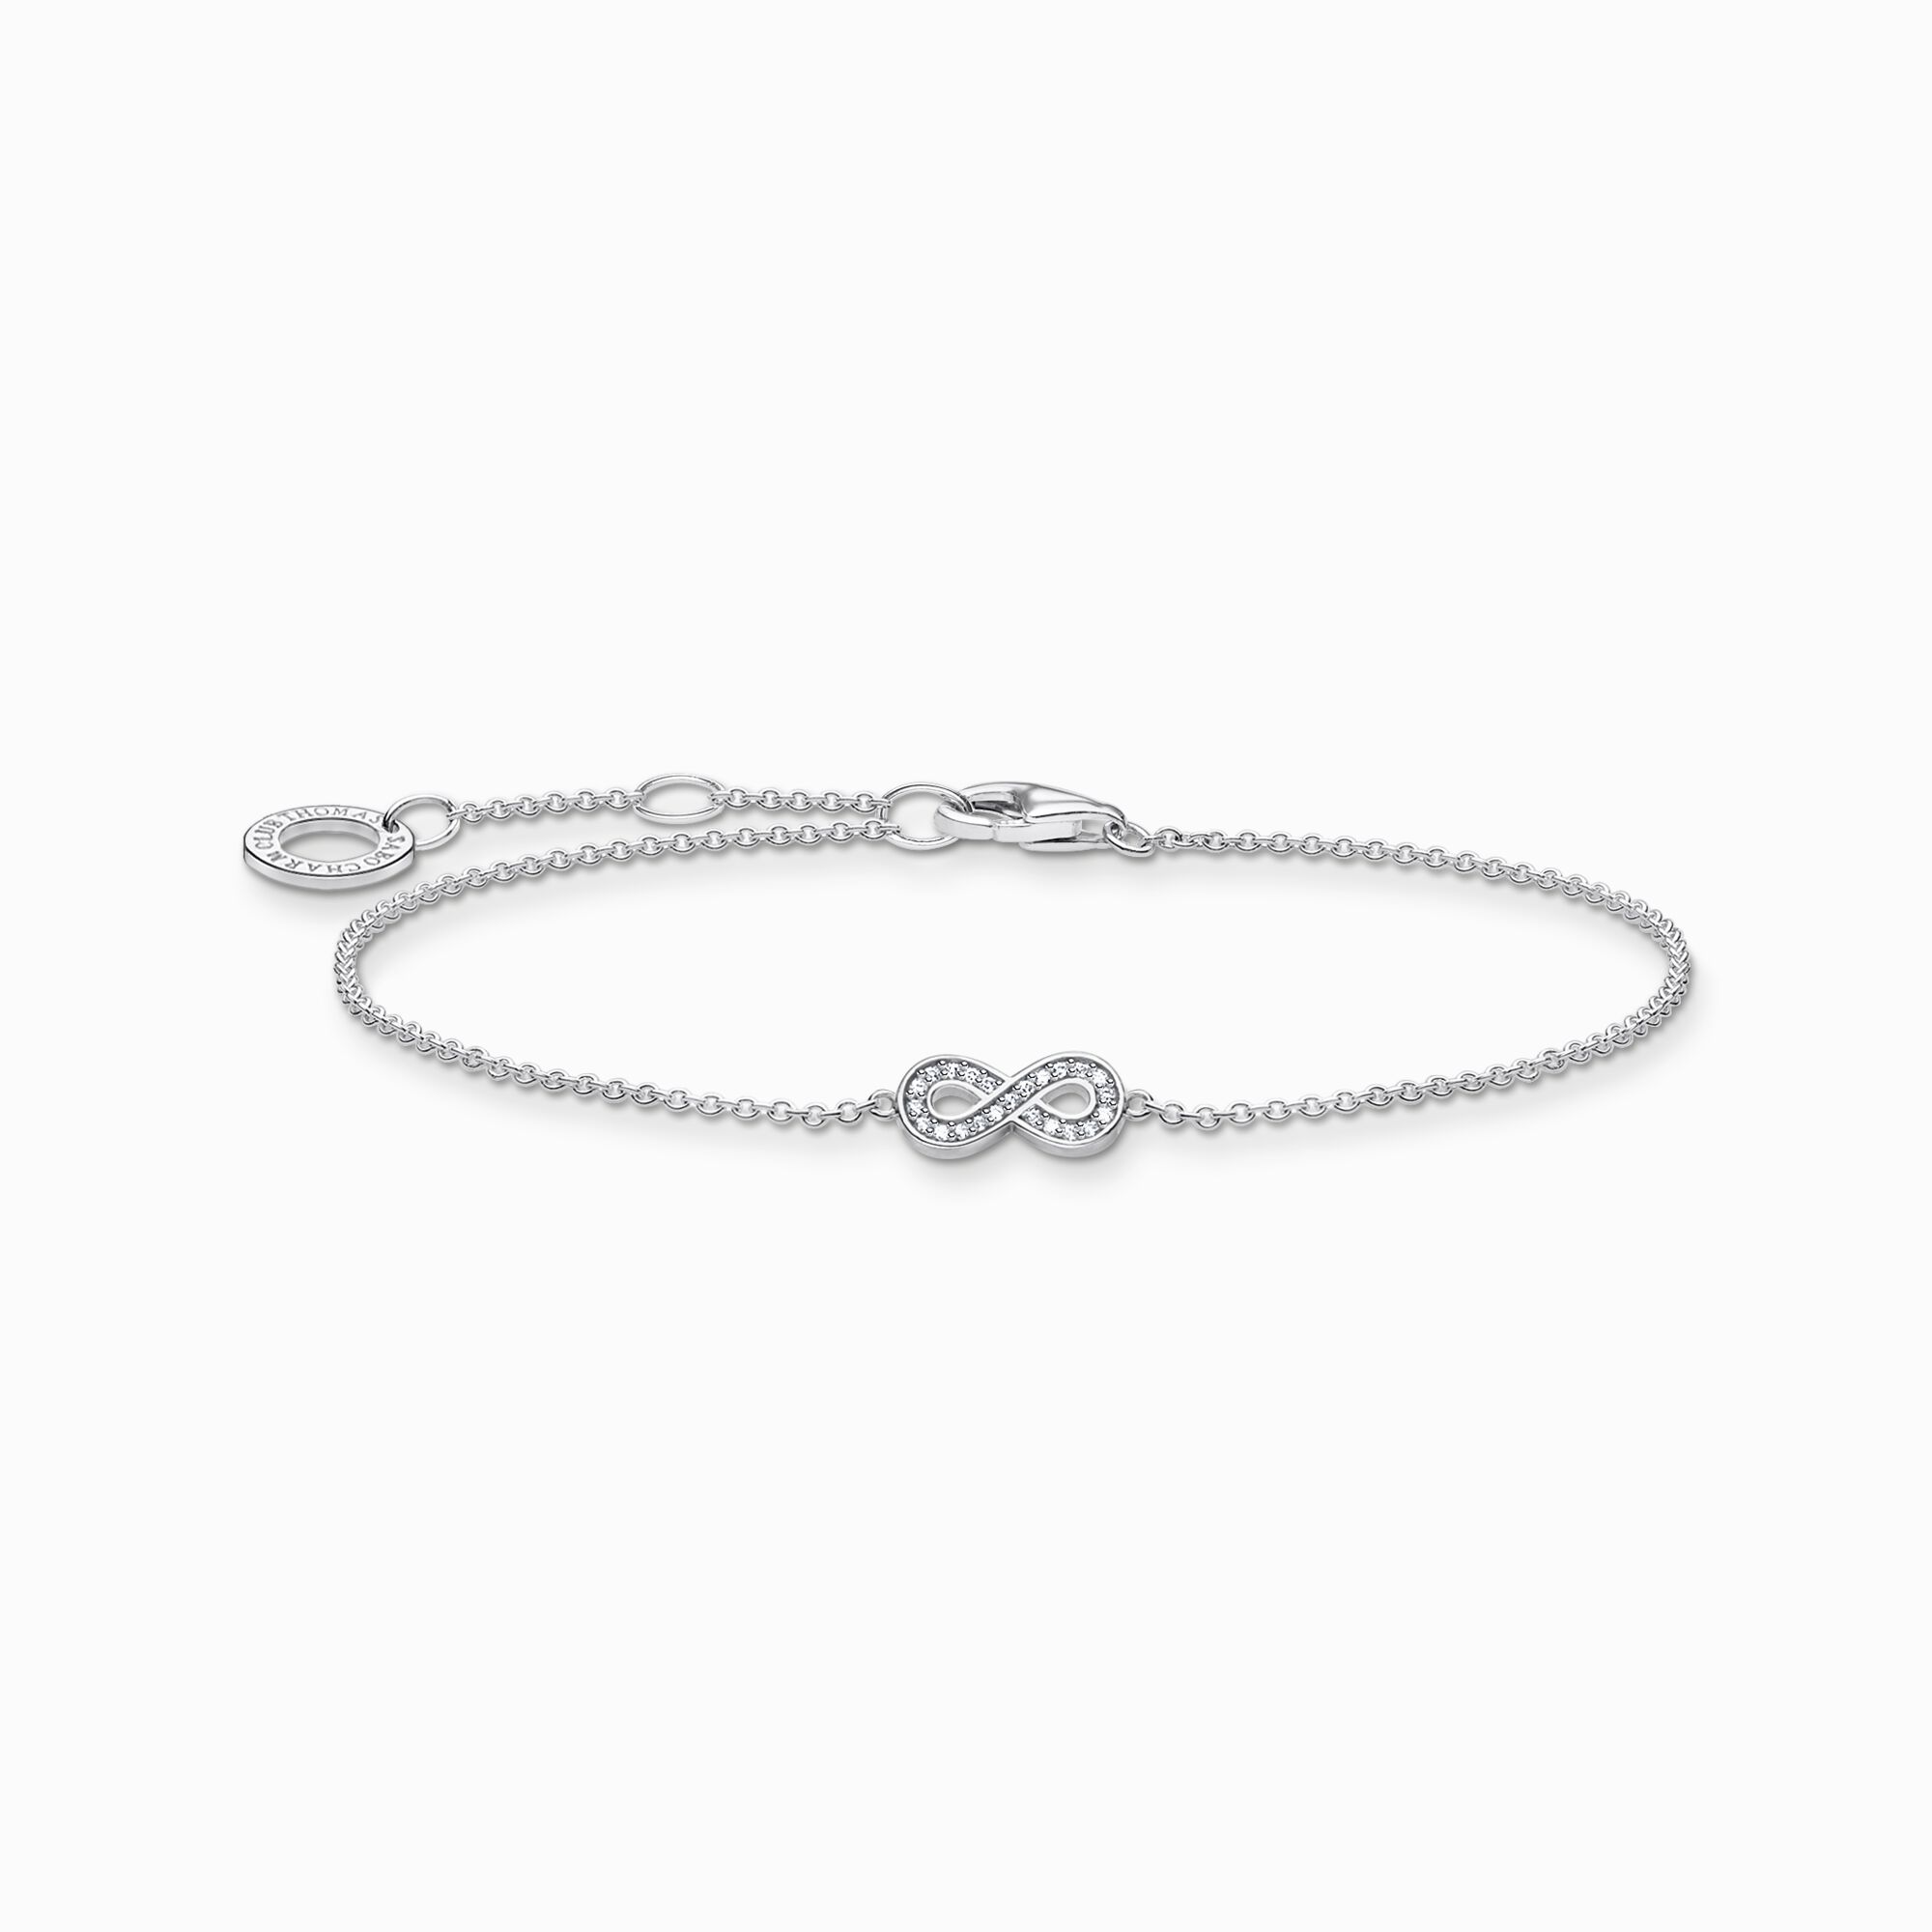 Bracelet infinity silver from the Charming Collection collection in the THOMAS SABO online store